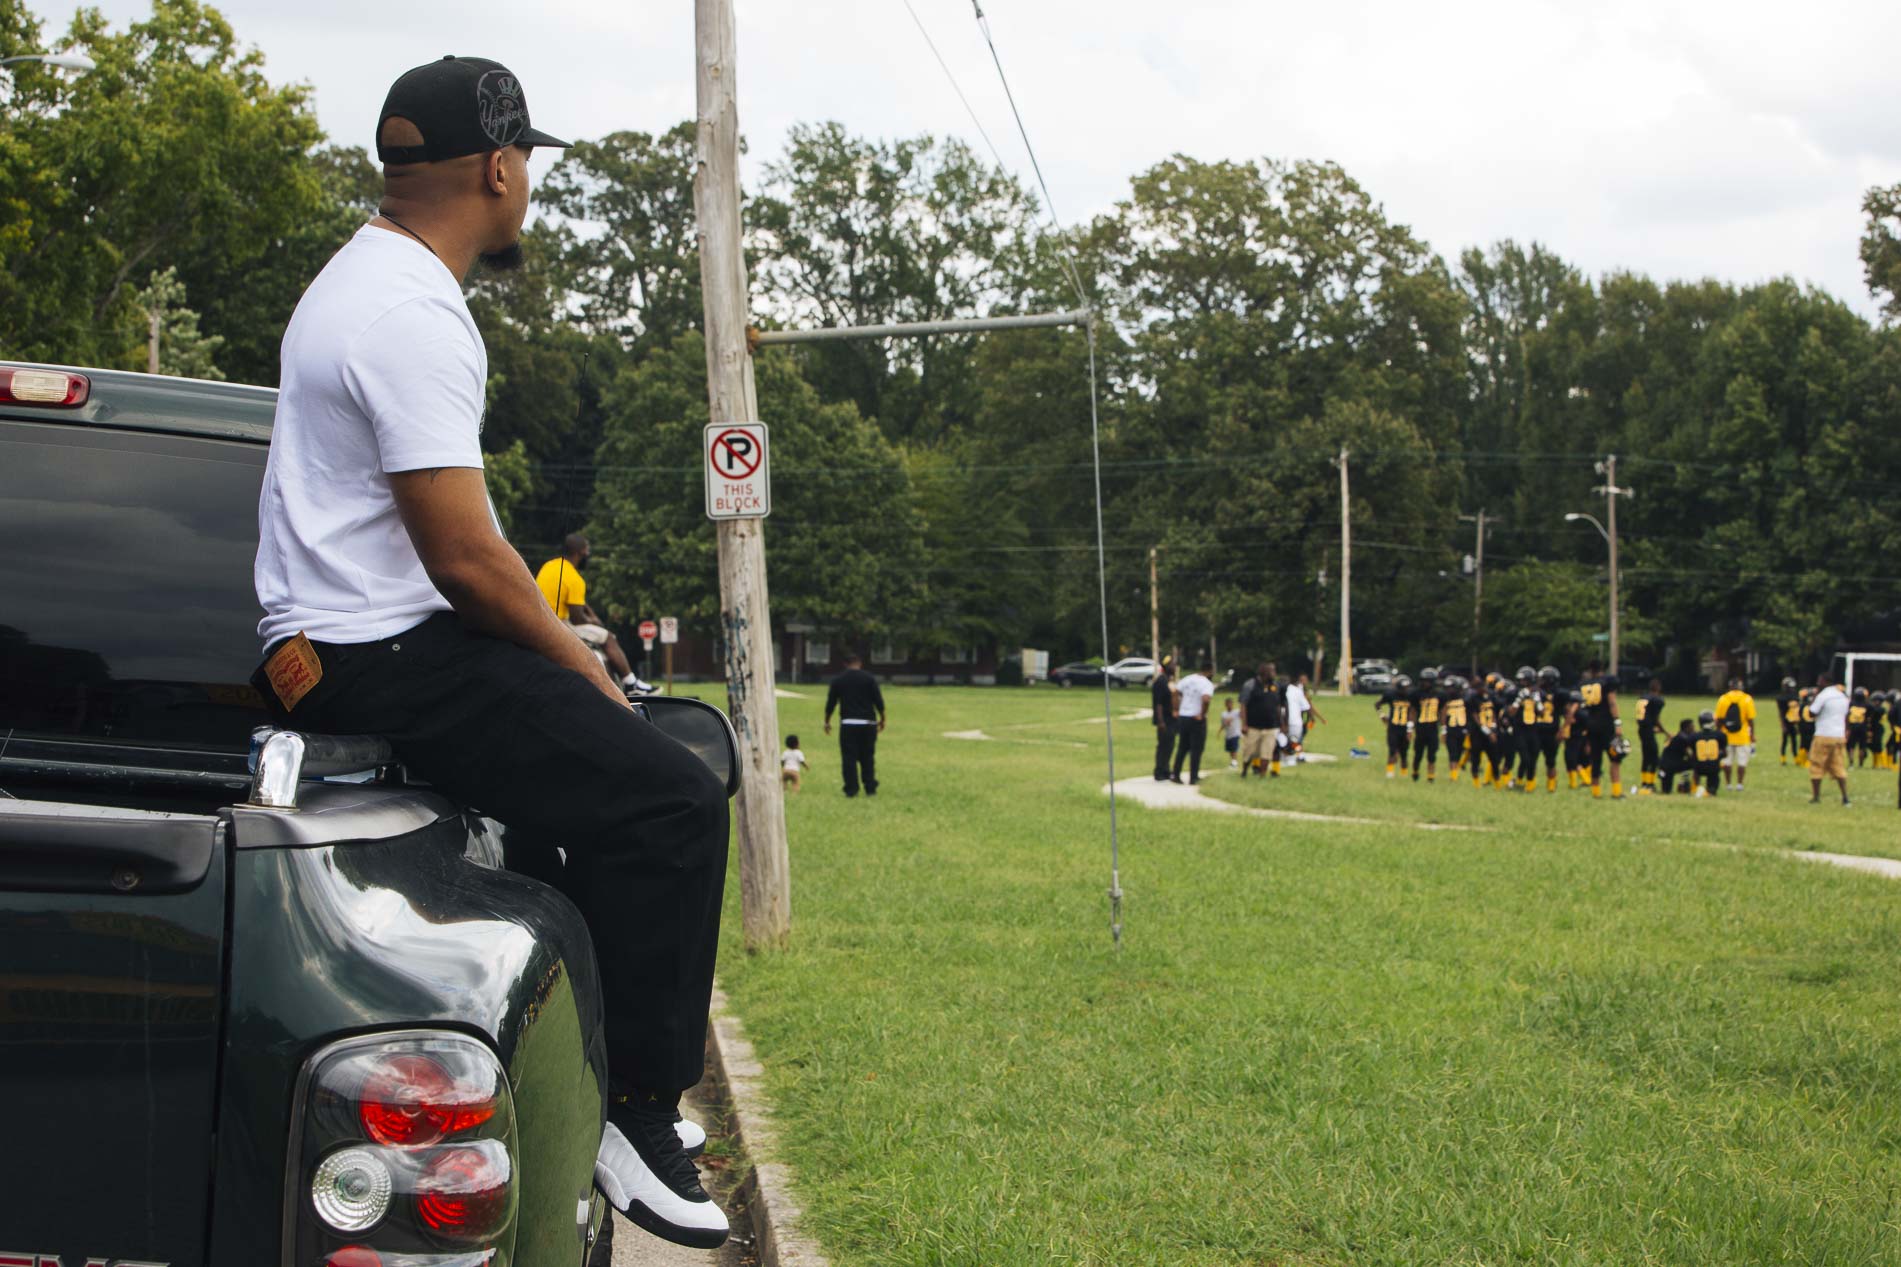 Zan 'Z' Dogan watches his son play in a football game at Treadwell Middle School. Treadwell is the area’s oldest school and opened in 1915. (Ziggy Mack)